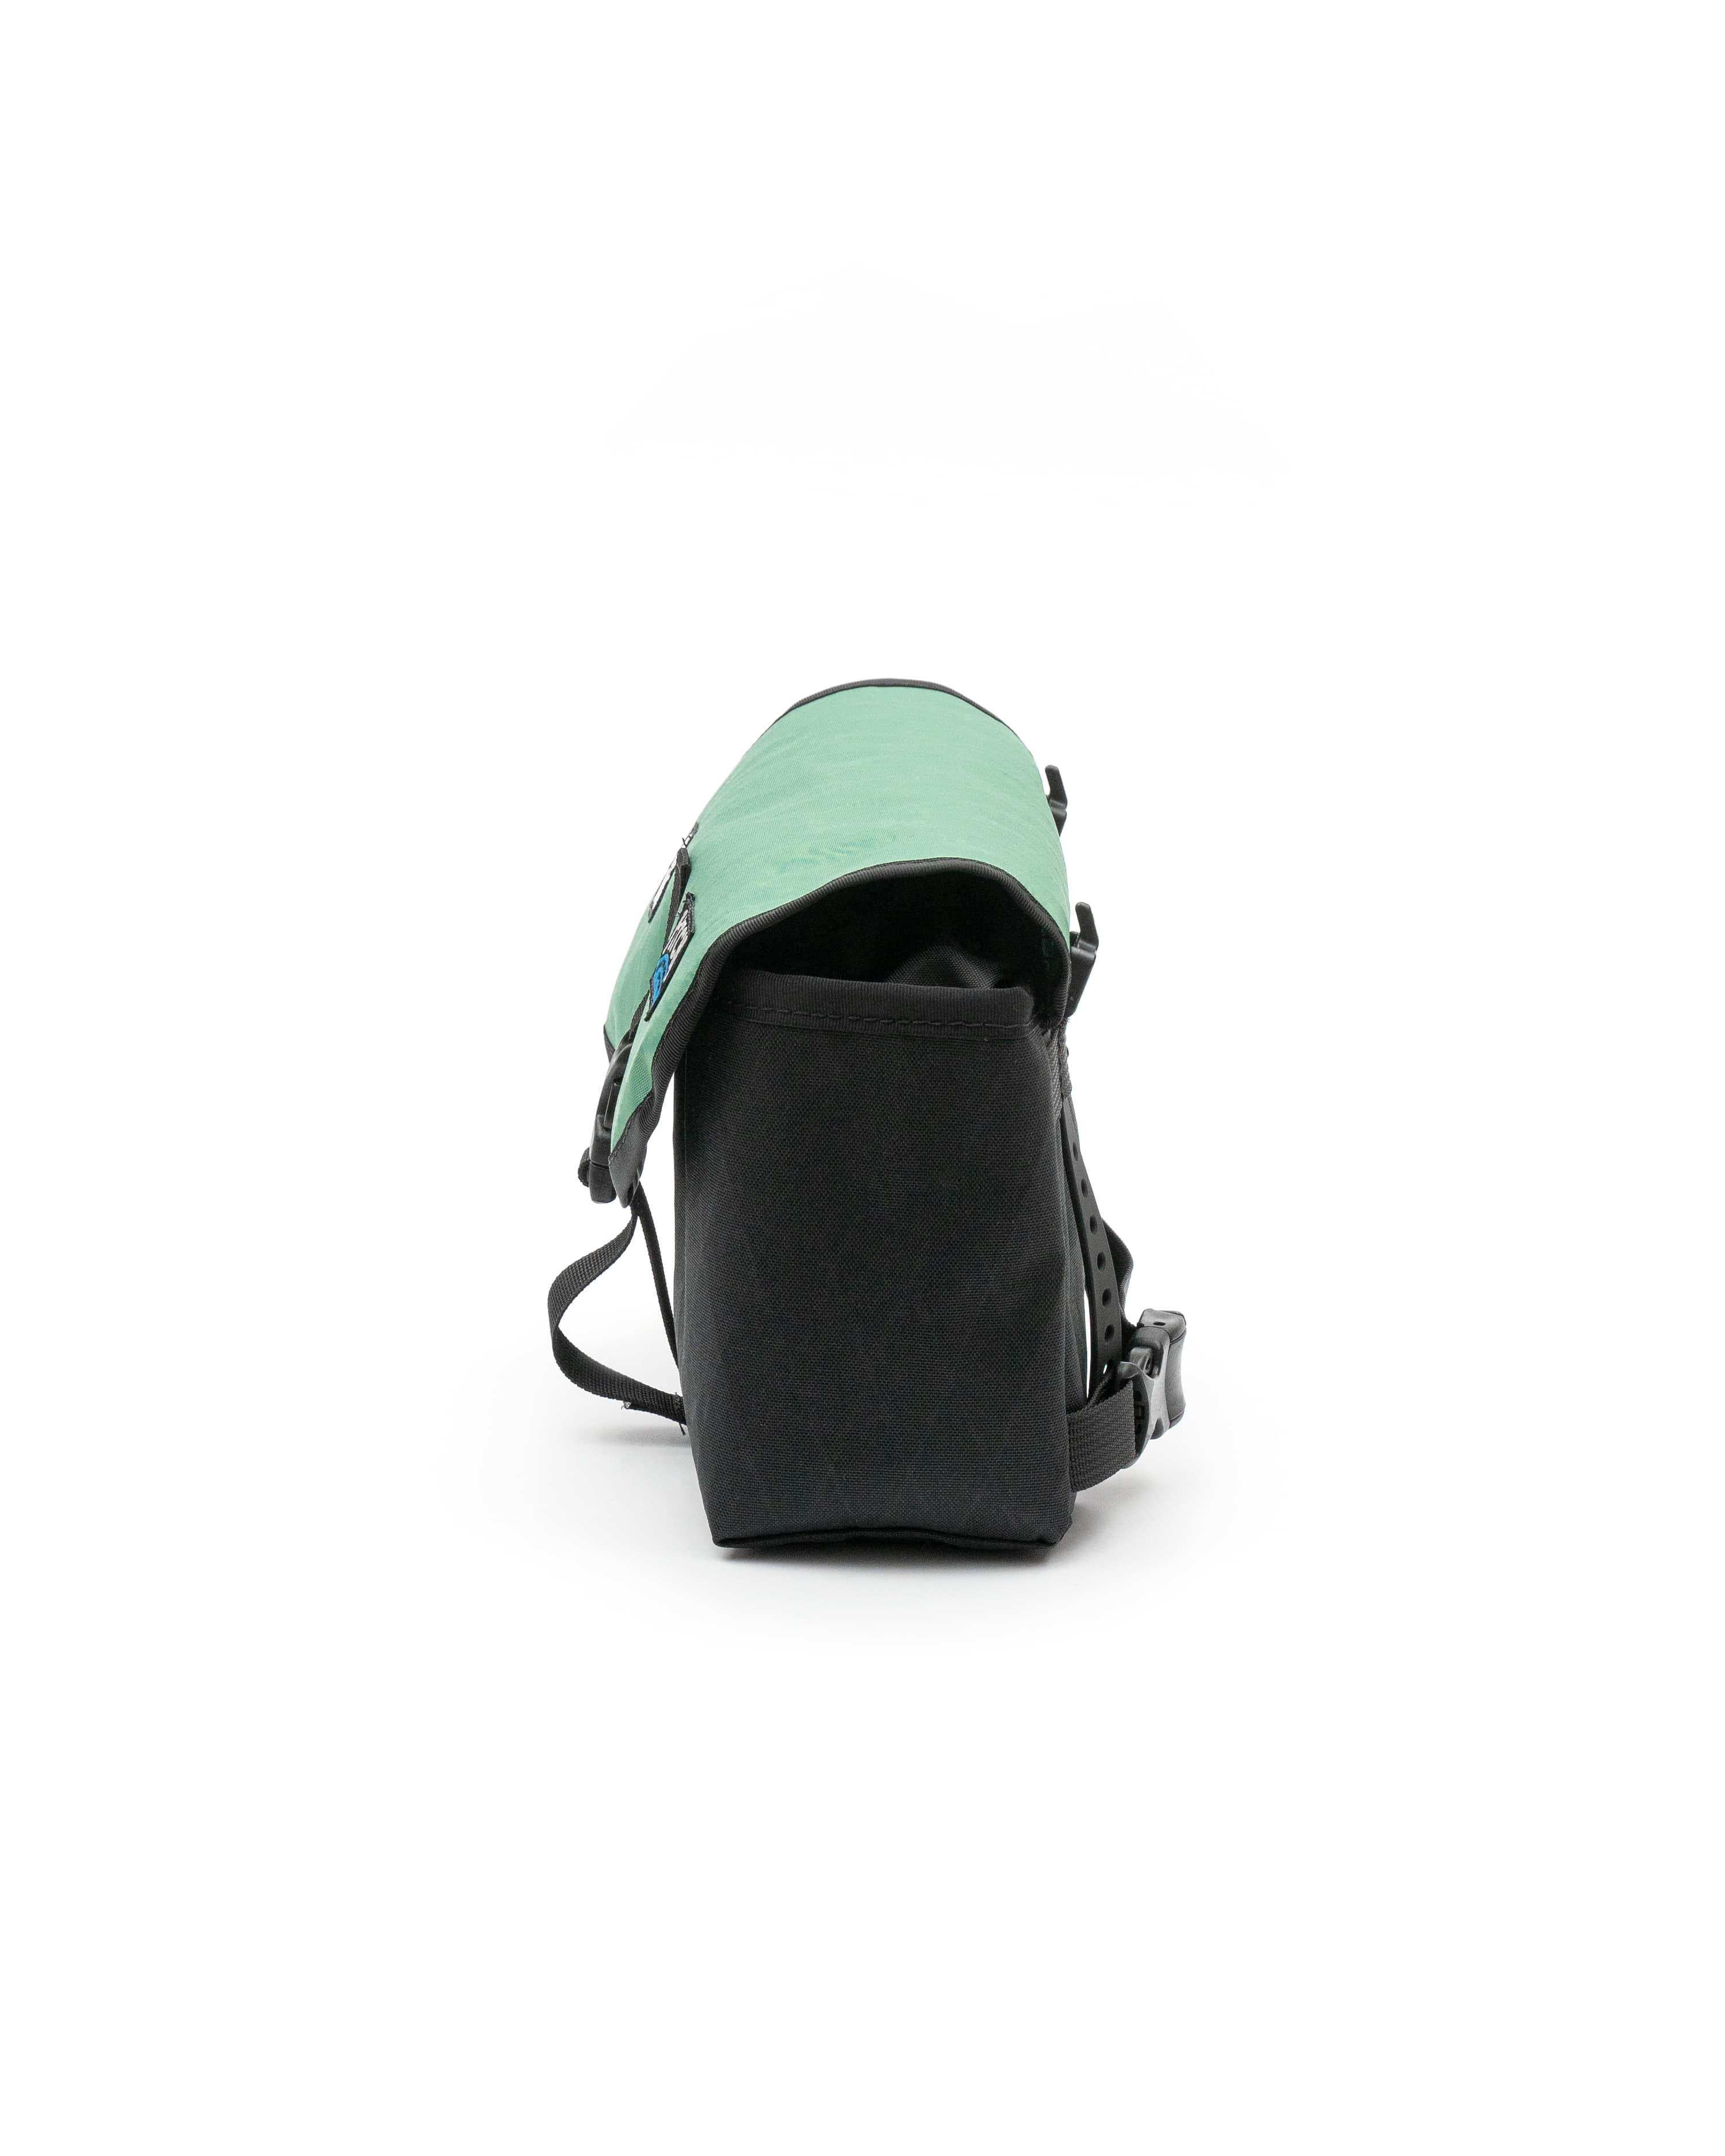 [out of stock] HITCHKAWA The Dolores bag (RX30)